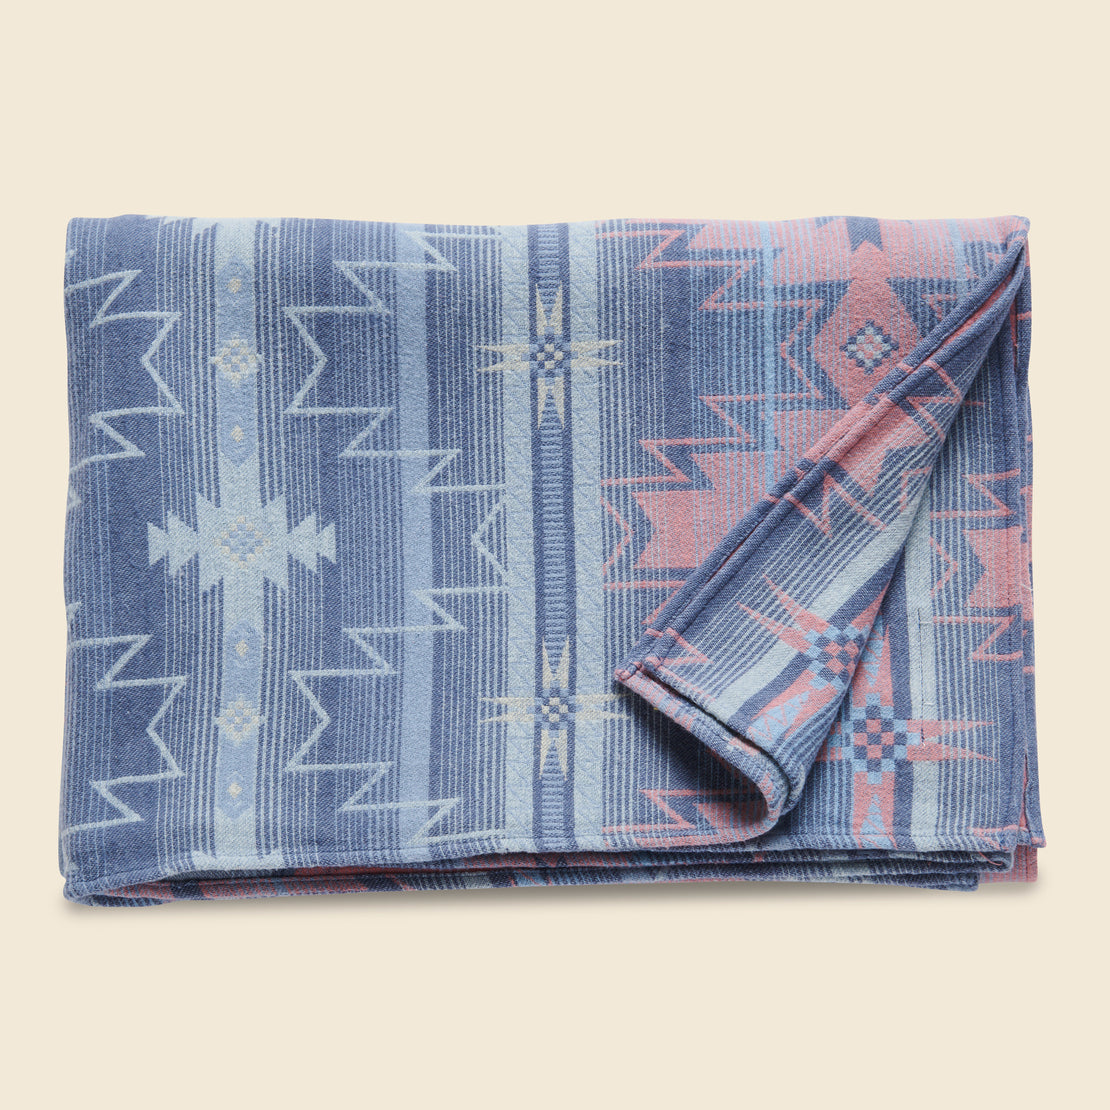 Adirondack Blanket - Pacific Morning Star - Faherty - STAG Provisions - Home - Bed - Blanket